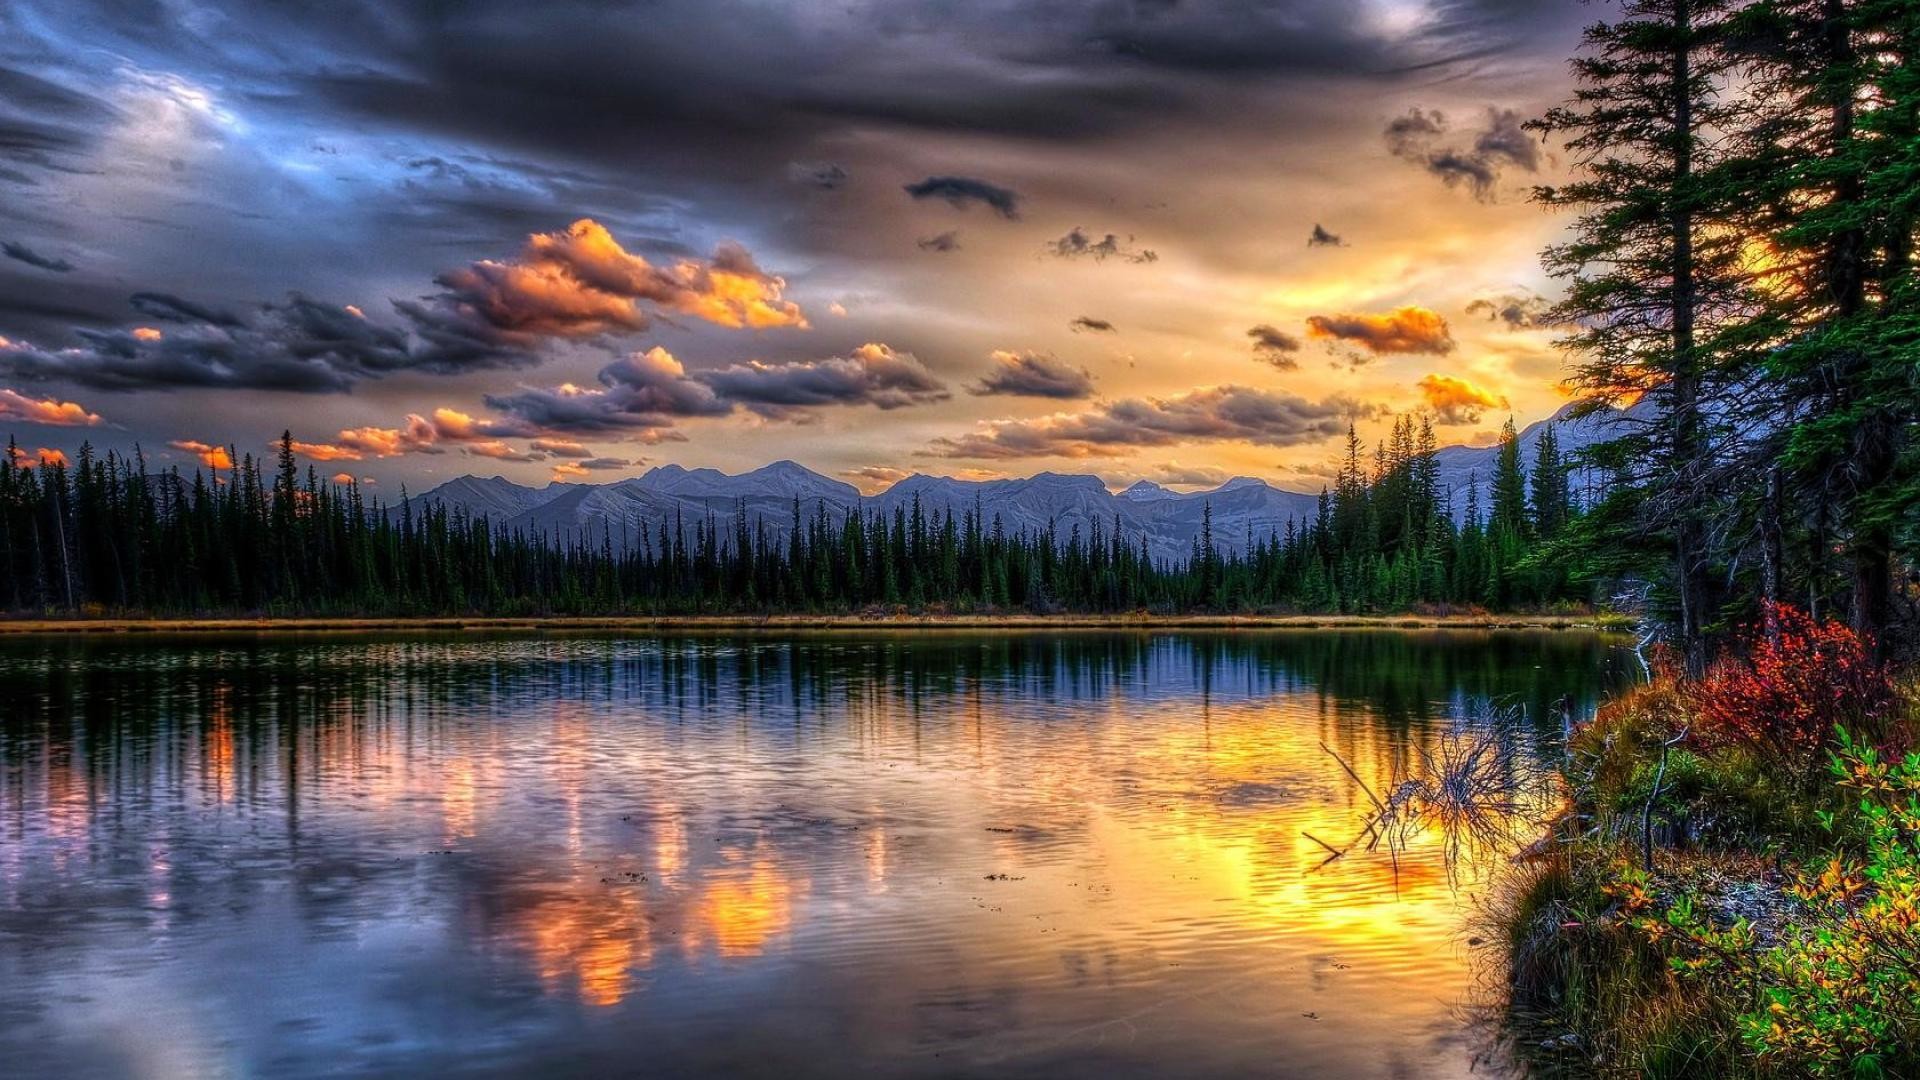 1920x1080 Beautiful Landscapes Wallpaper Hd Pictures 4 HD Wallpapers .